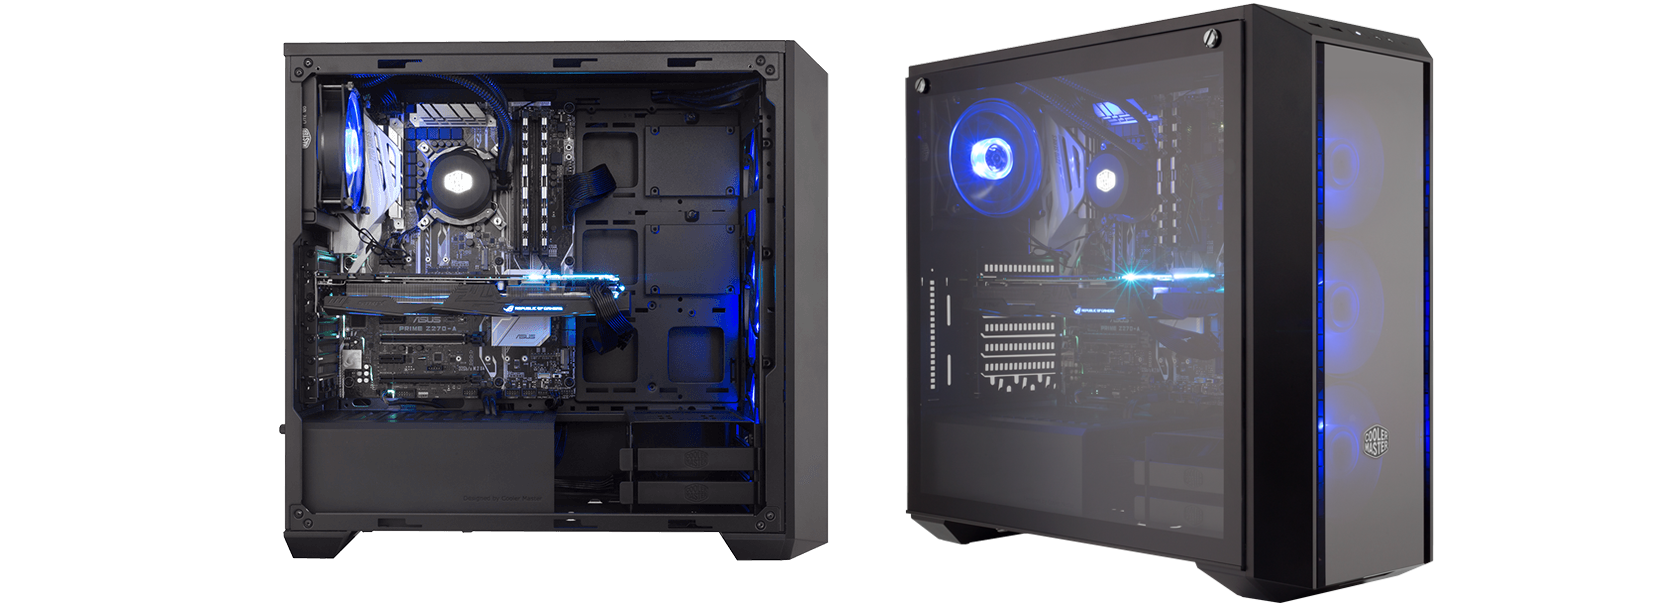 Cooler Master, MasterBox Pro 5 RGB with Fan Controller (MCY-B5P2-KWGN-02)